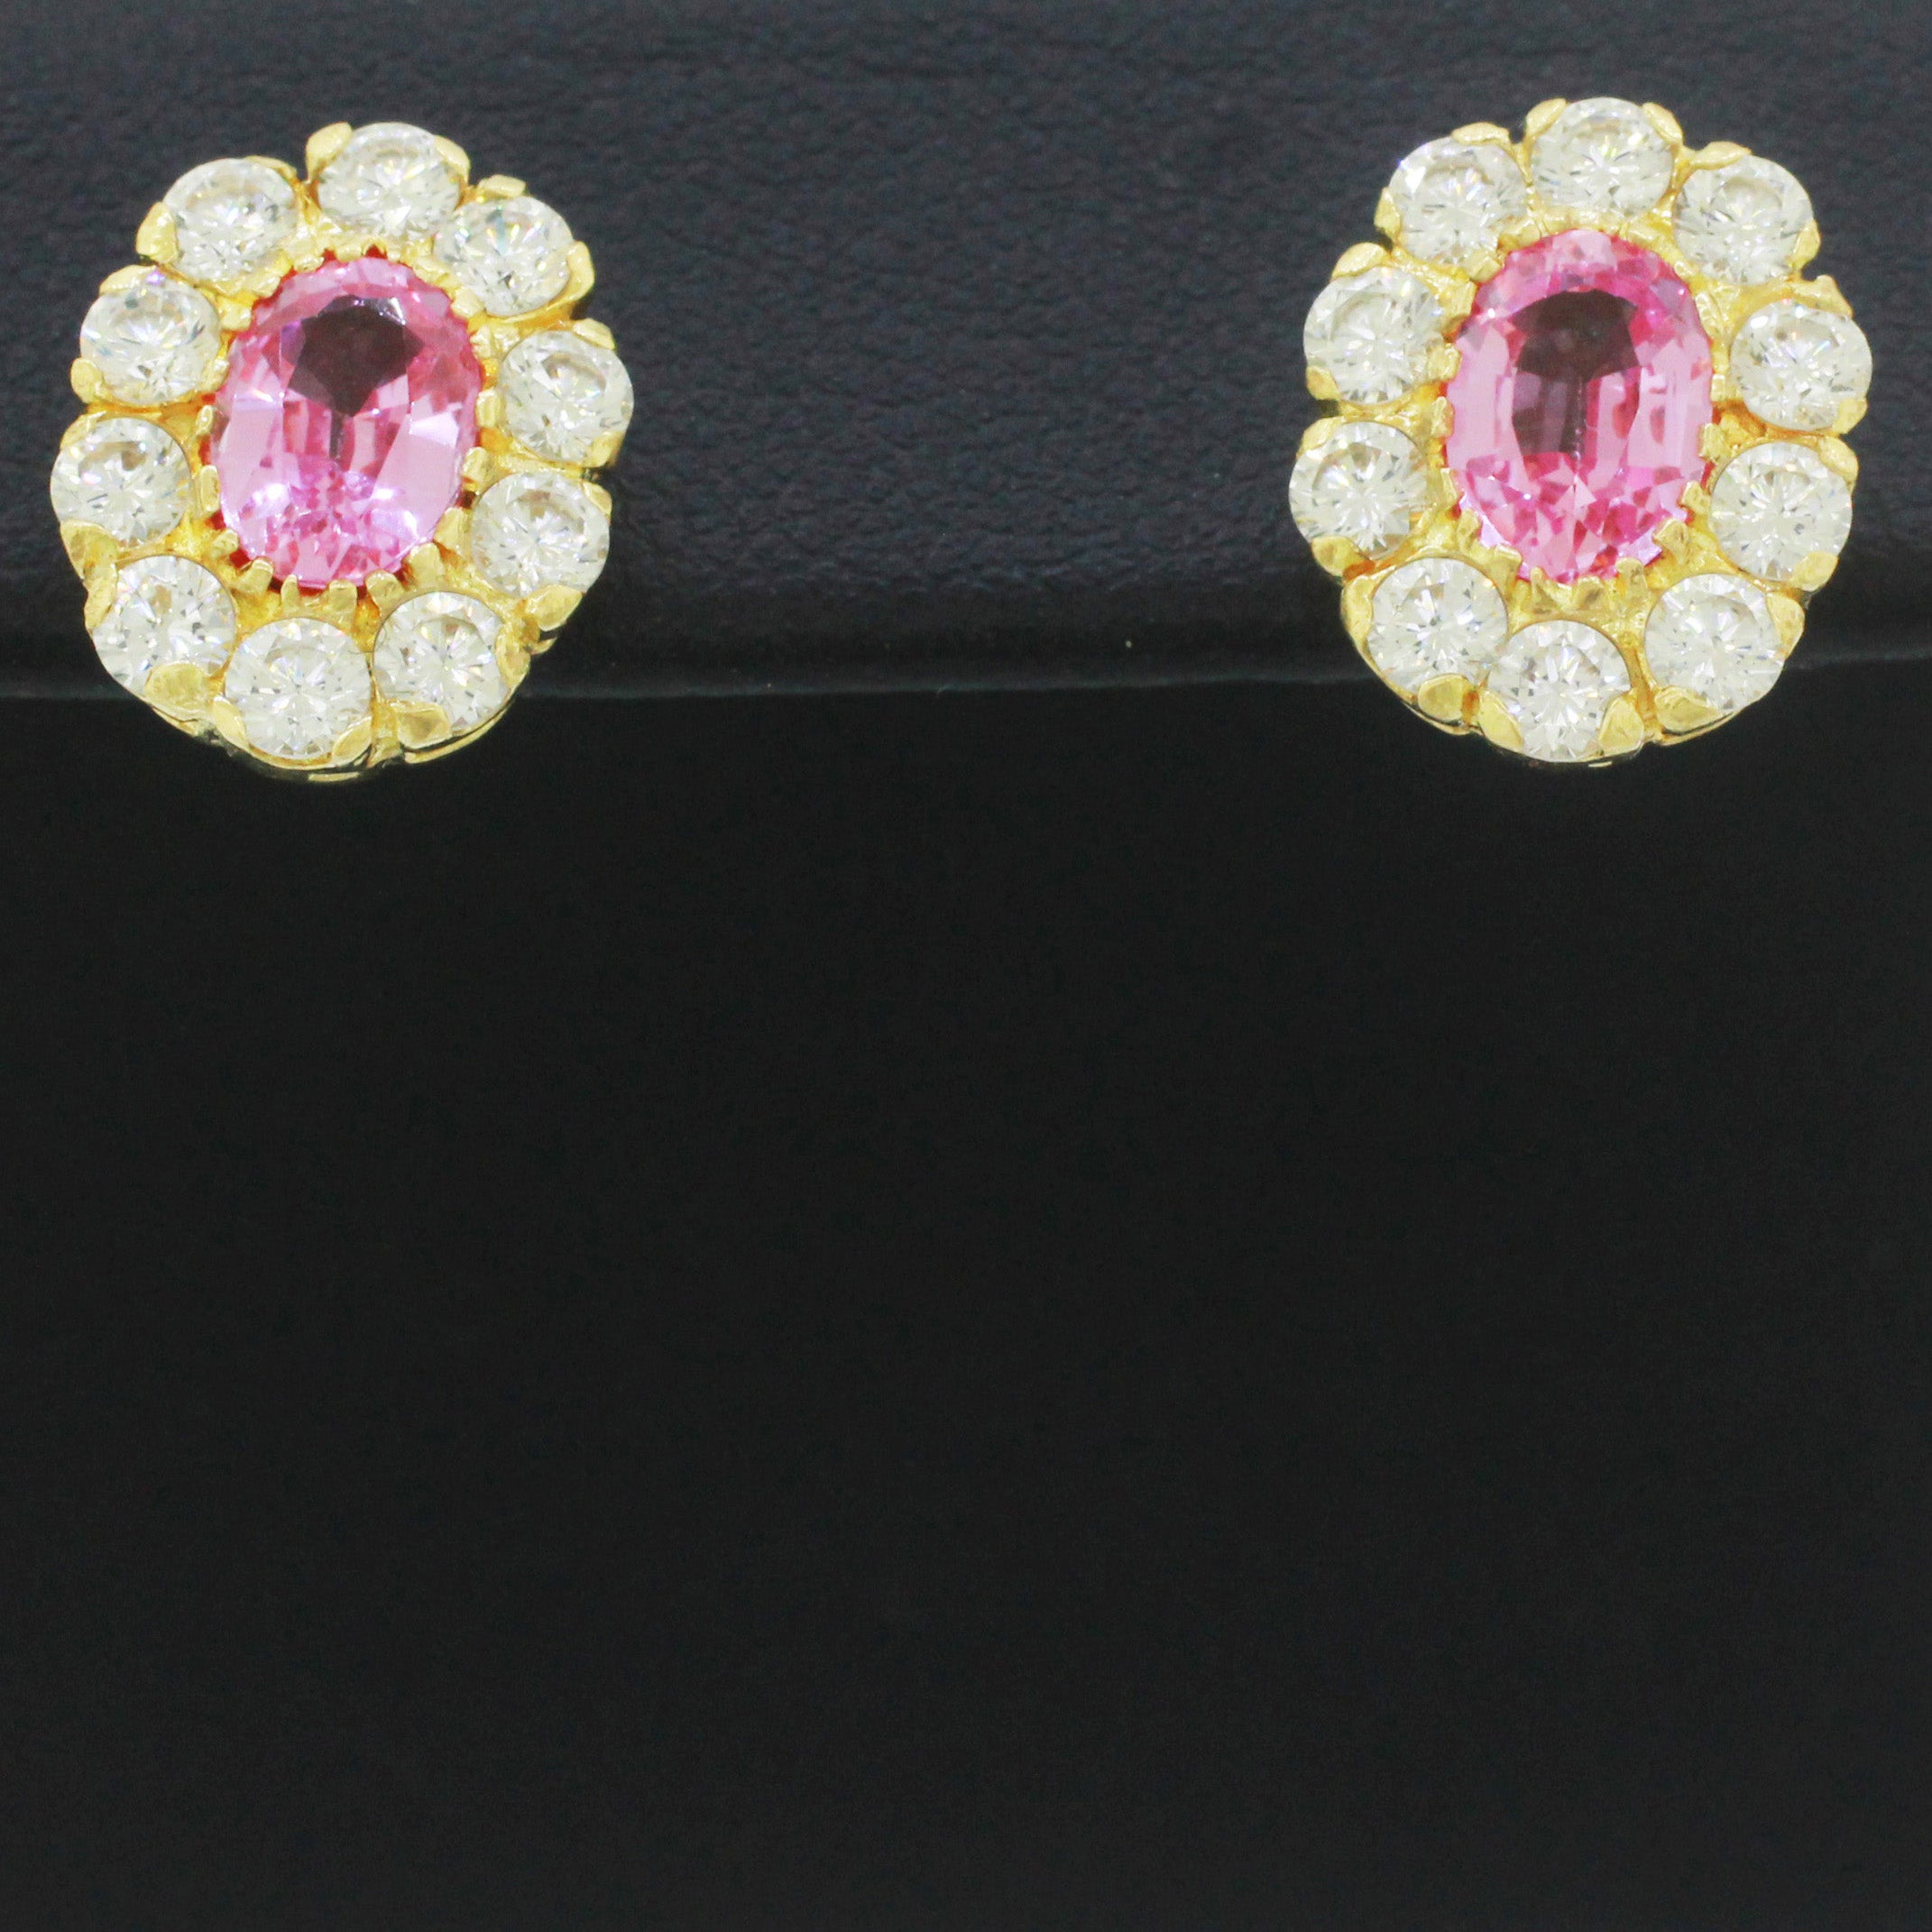 Vintage 14k Yellow Gold 1.50ctw Pink Tourmaline & Cubic Zirconia Oval Earrings